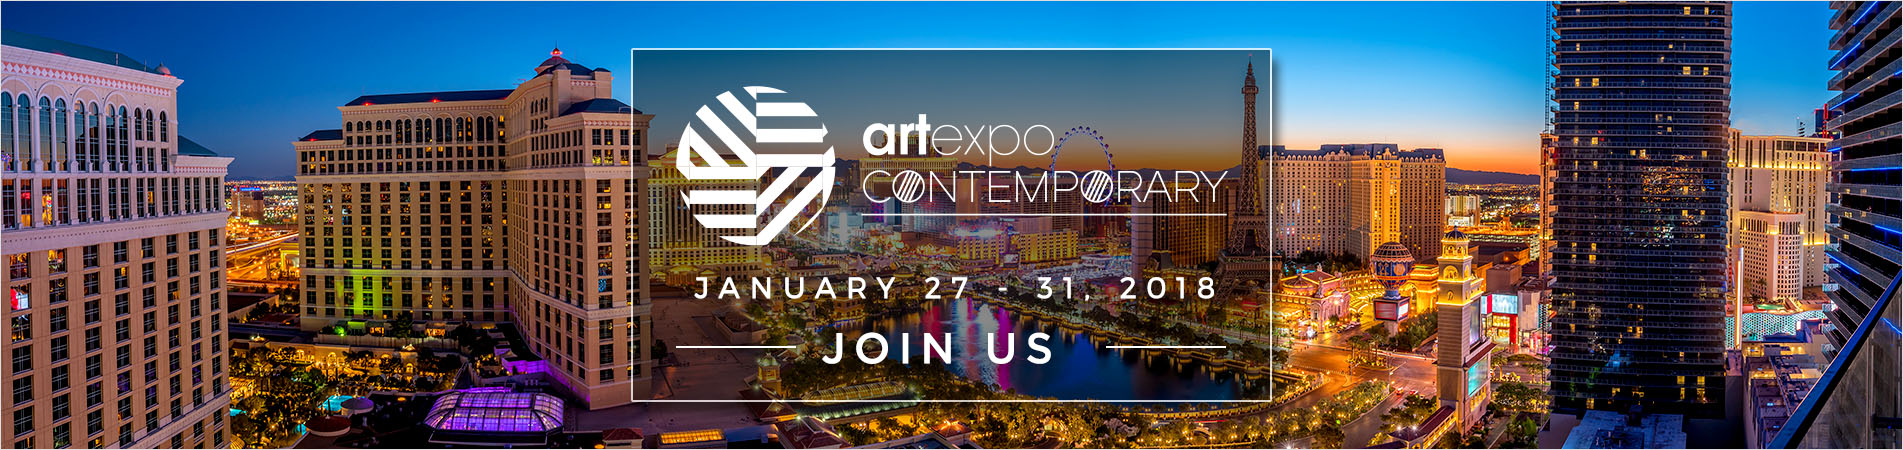 Las Vegas Market joins forces with RMG to Launch Artexpo Contemporary Las Vegas in Winter 2018